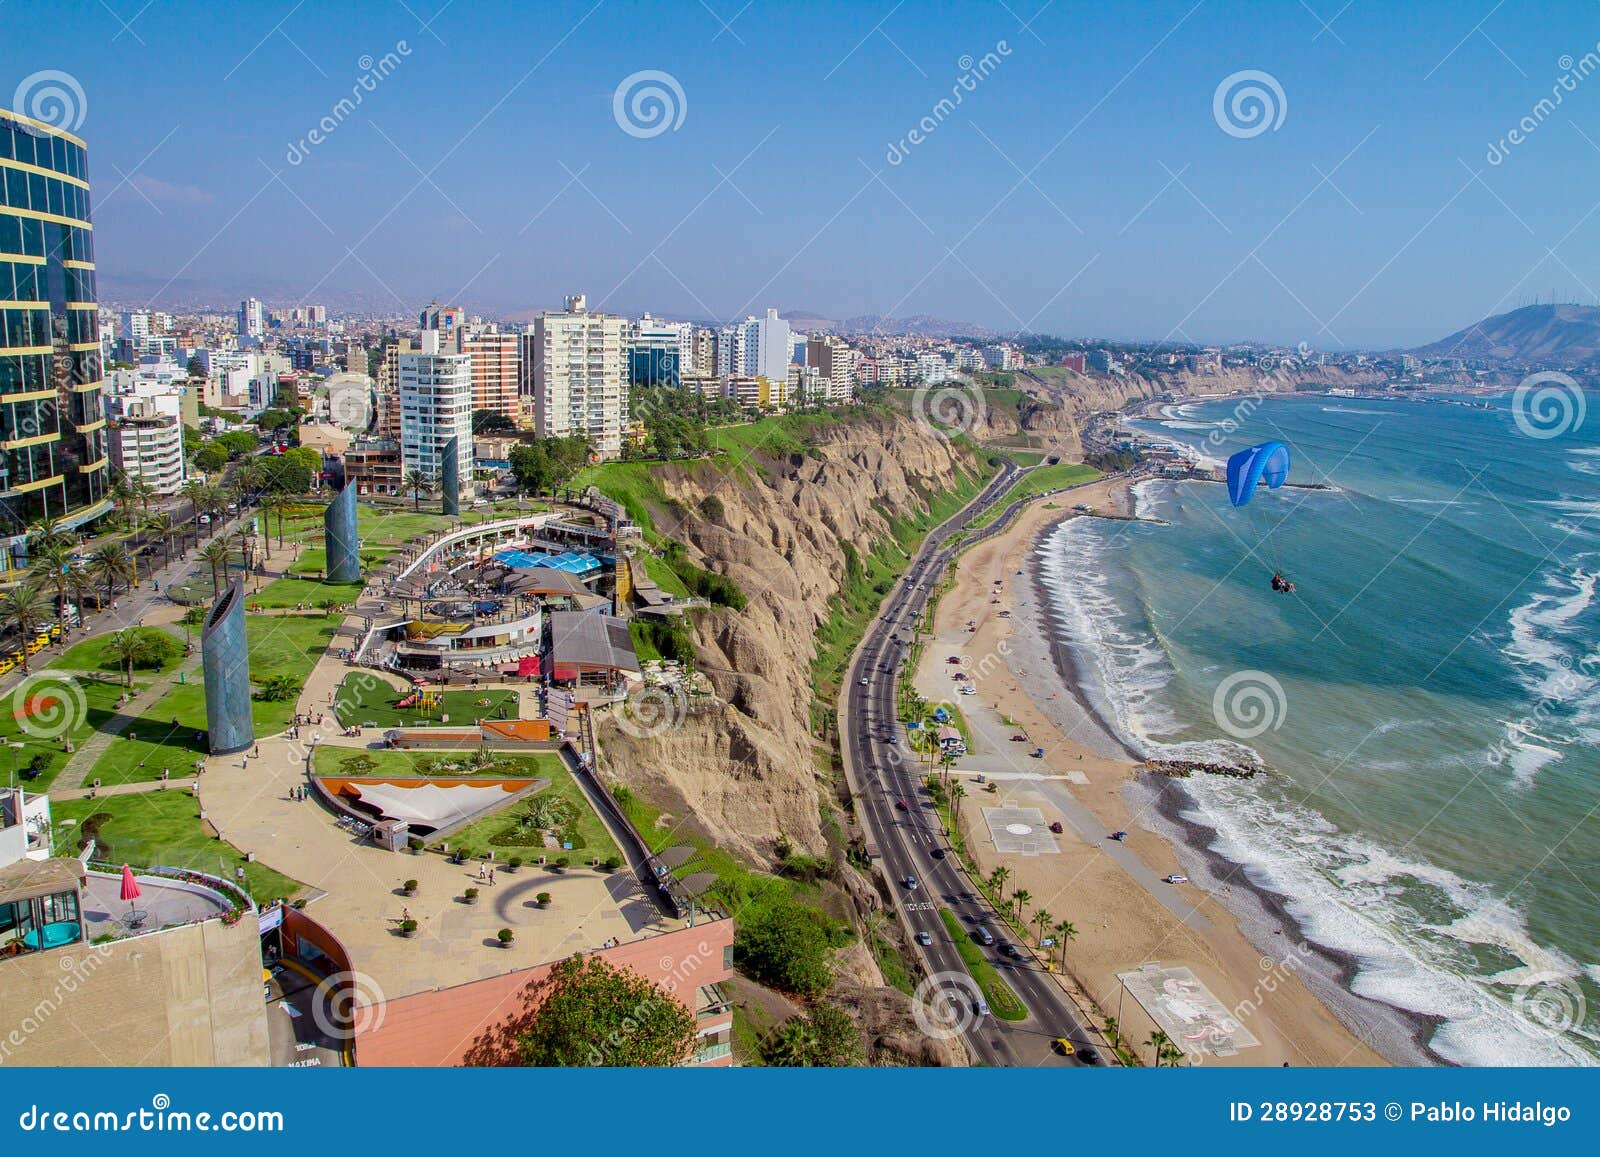 View of Miraflores Park, Lima - Peru Stock Image - Image of ancient ...